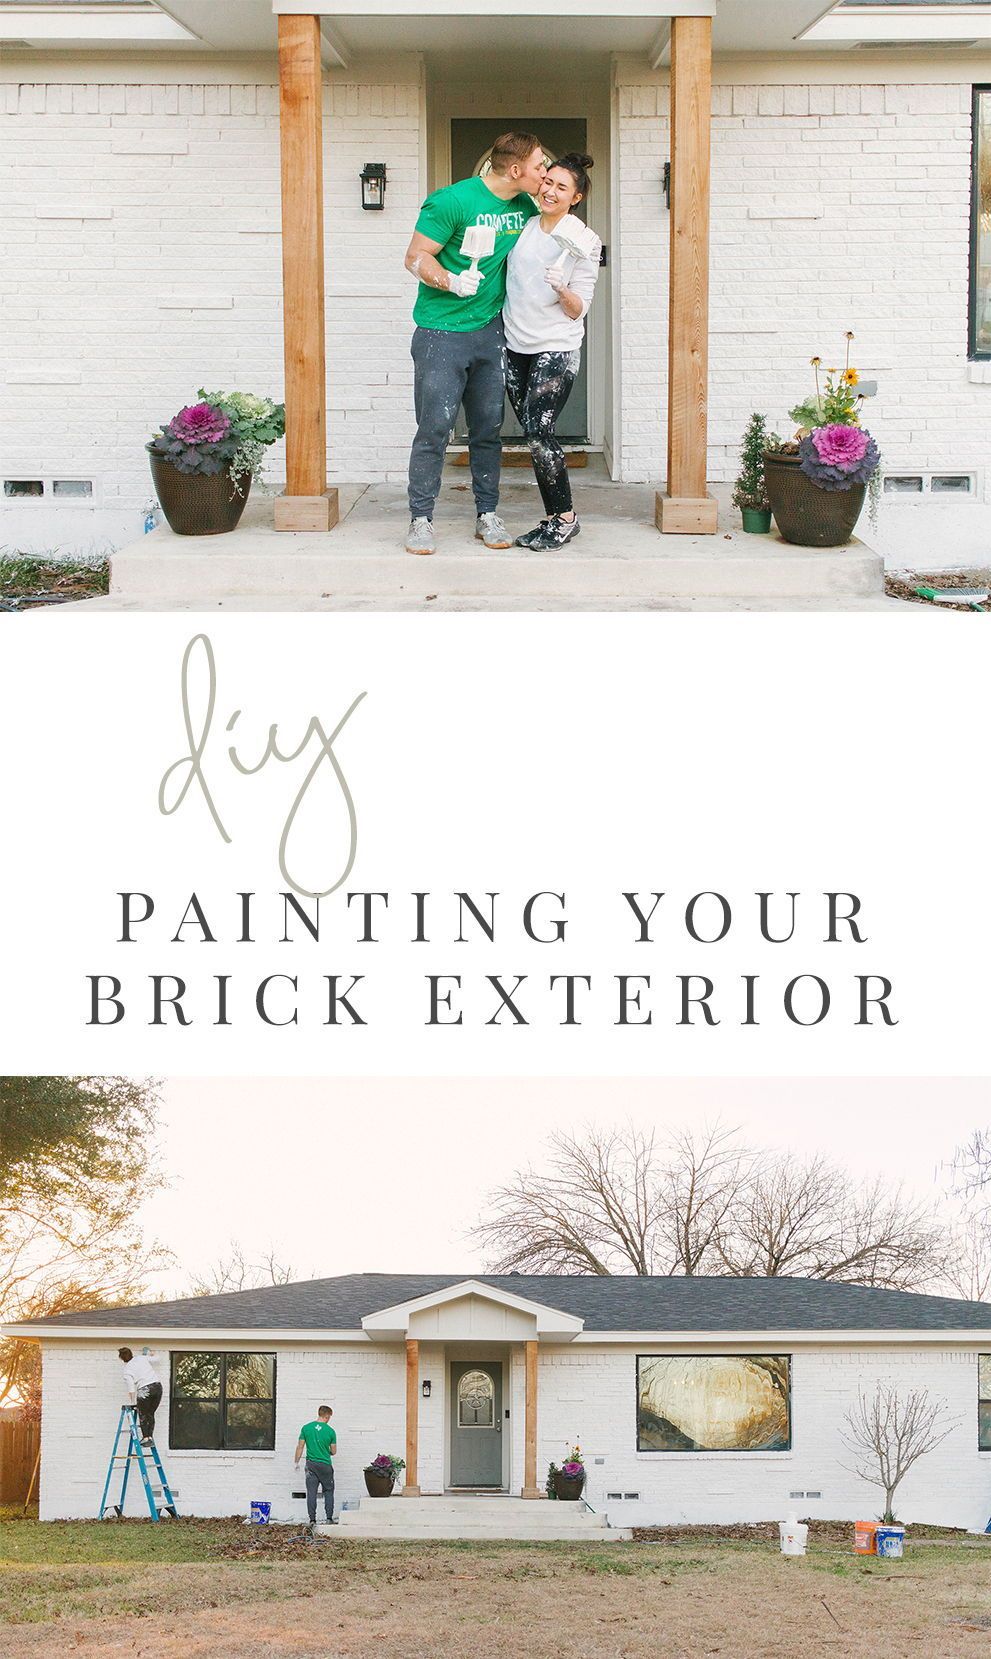 How to Paint the Exterior of Your Brick Home  — Farmhouse Living - How to Paint the Exterior of Your Brick Home  — Farmhouse Living -   16 diy House exterior ideas